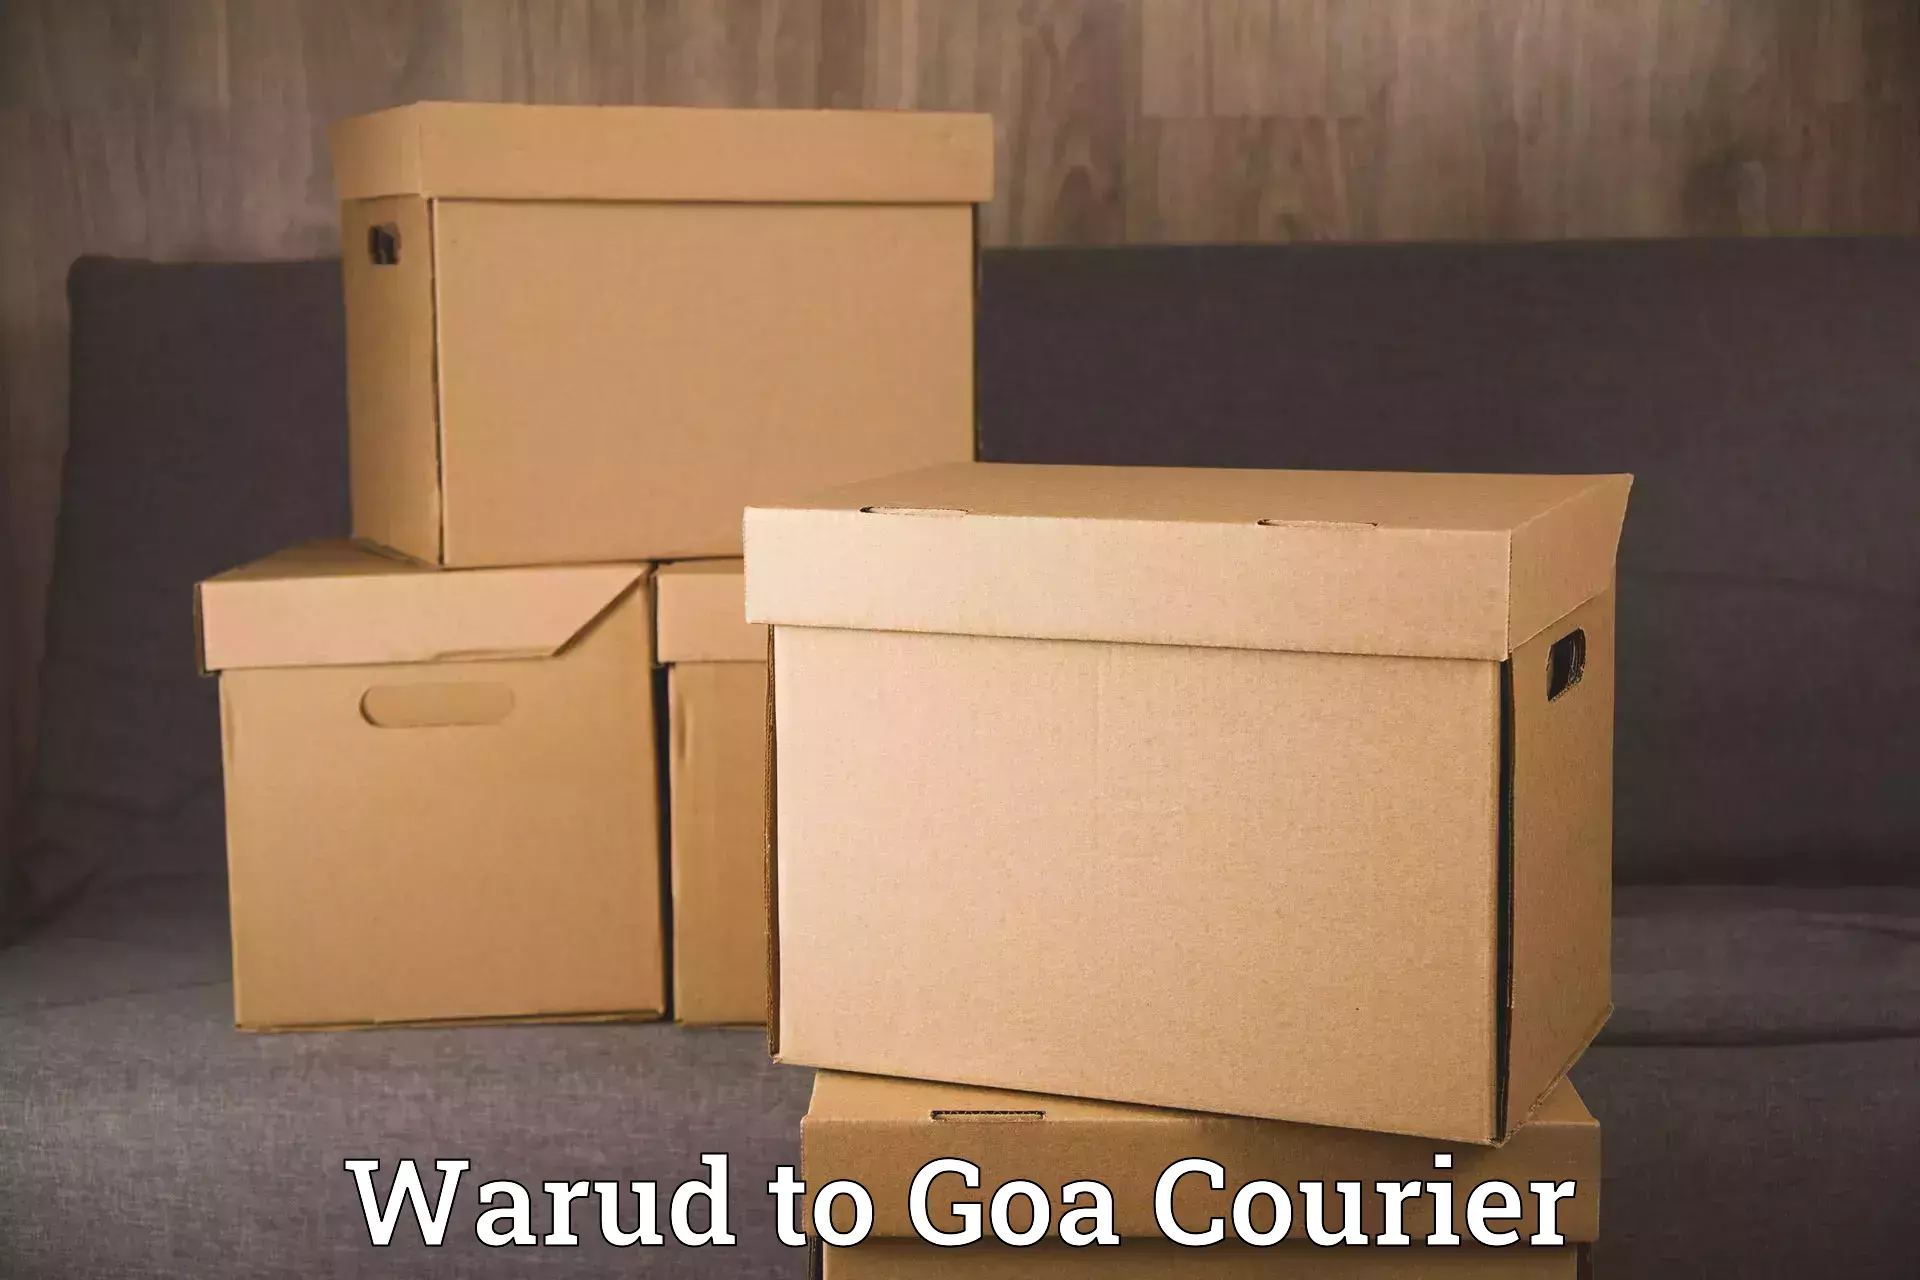 Residential moving experts Warud to Goa